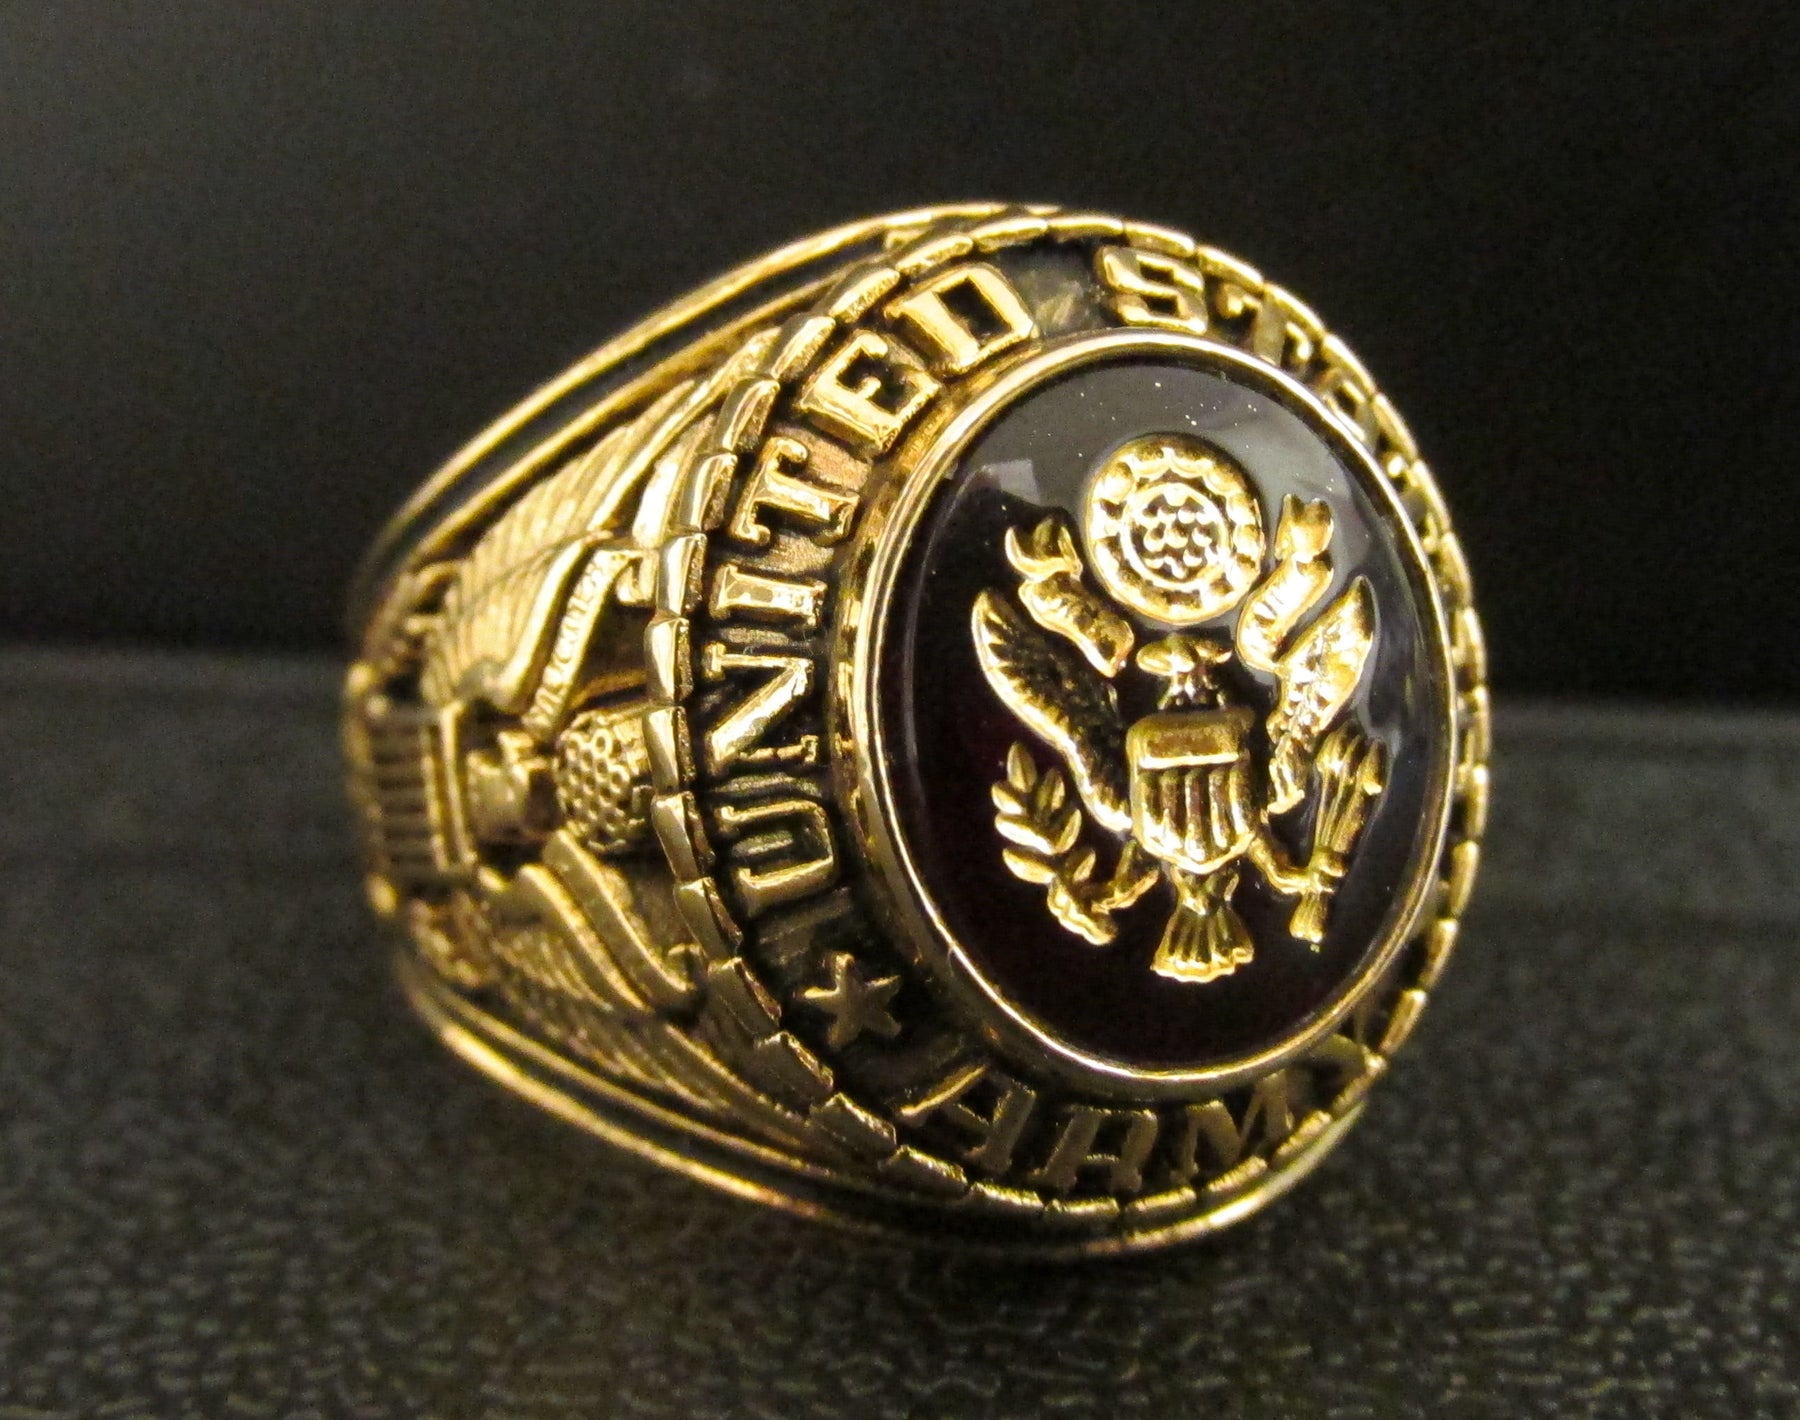 U.S. Army Ring - Electorplated 18k Gold Ring